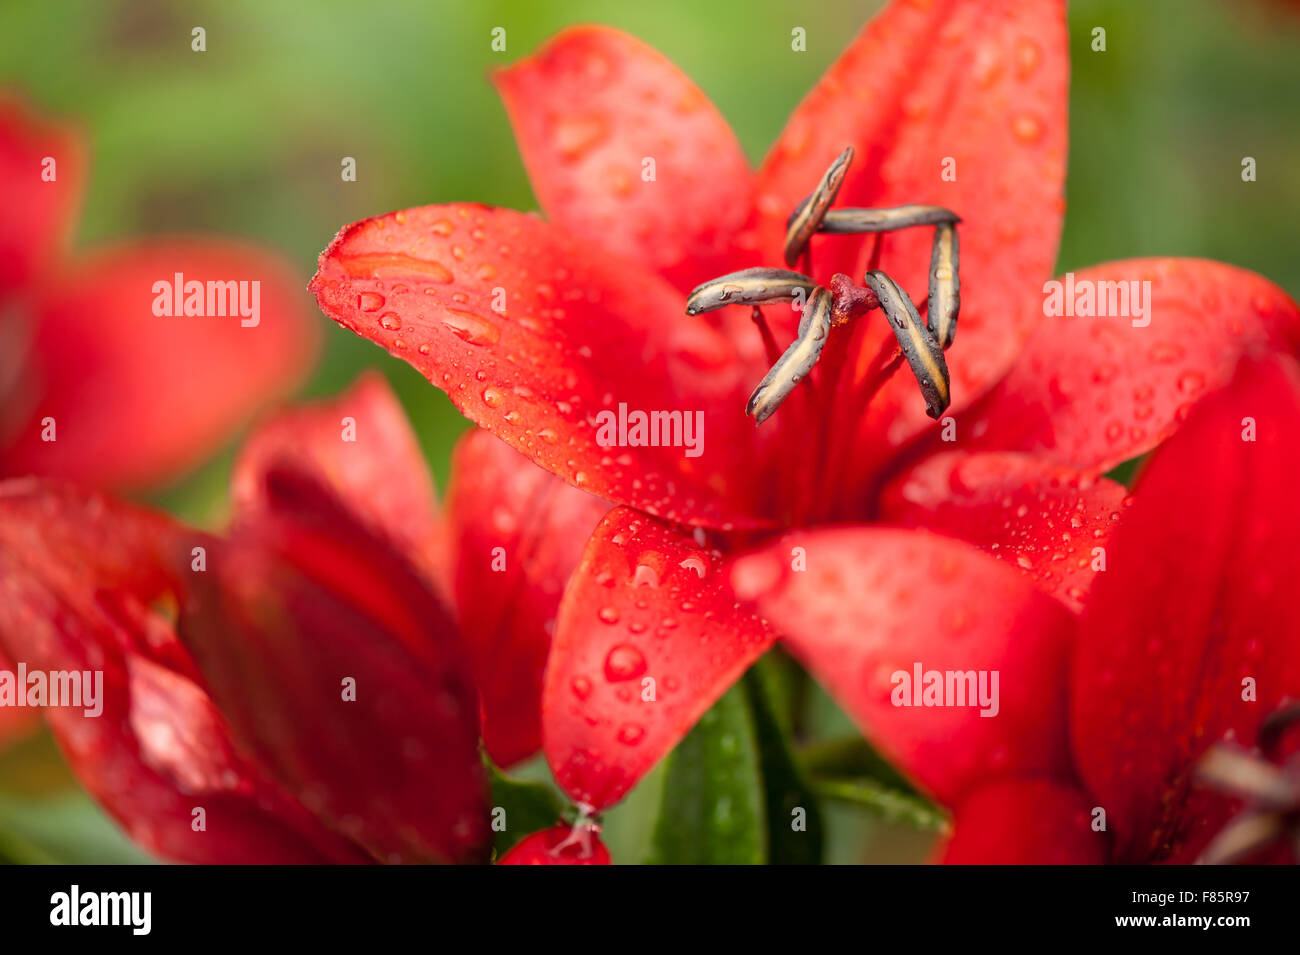 Raindrops on red Lily flower showing stamens macro, large blooming deciduous perennial plant in the Liliaceae family, flowers... Stock Photo